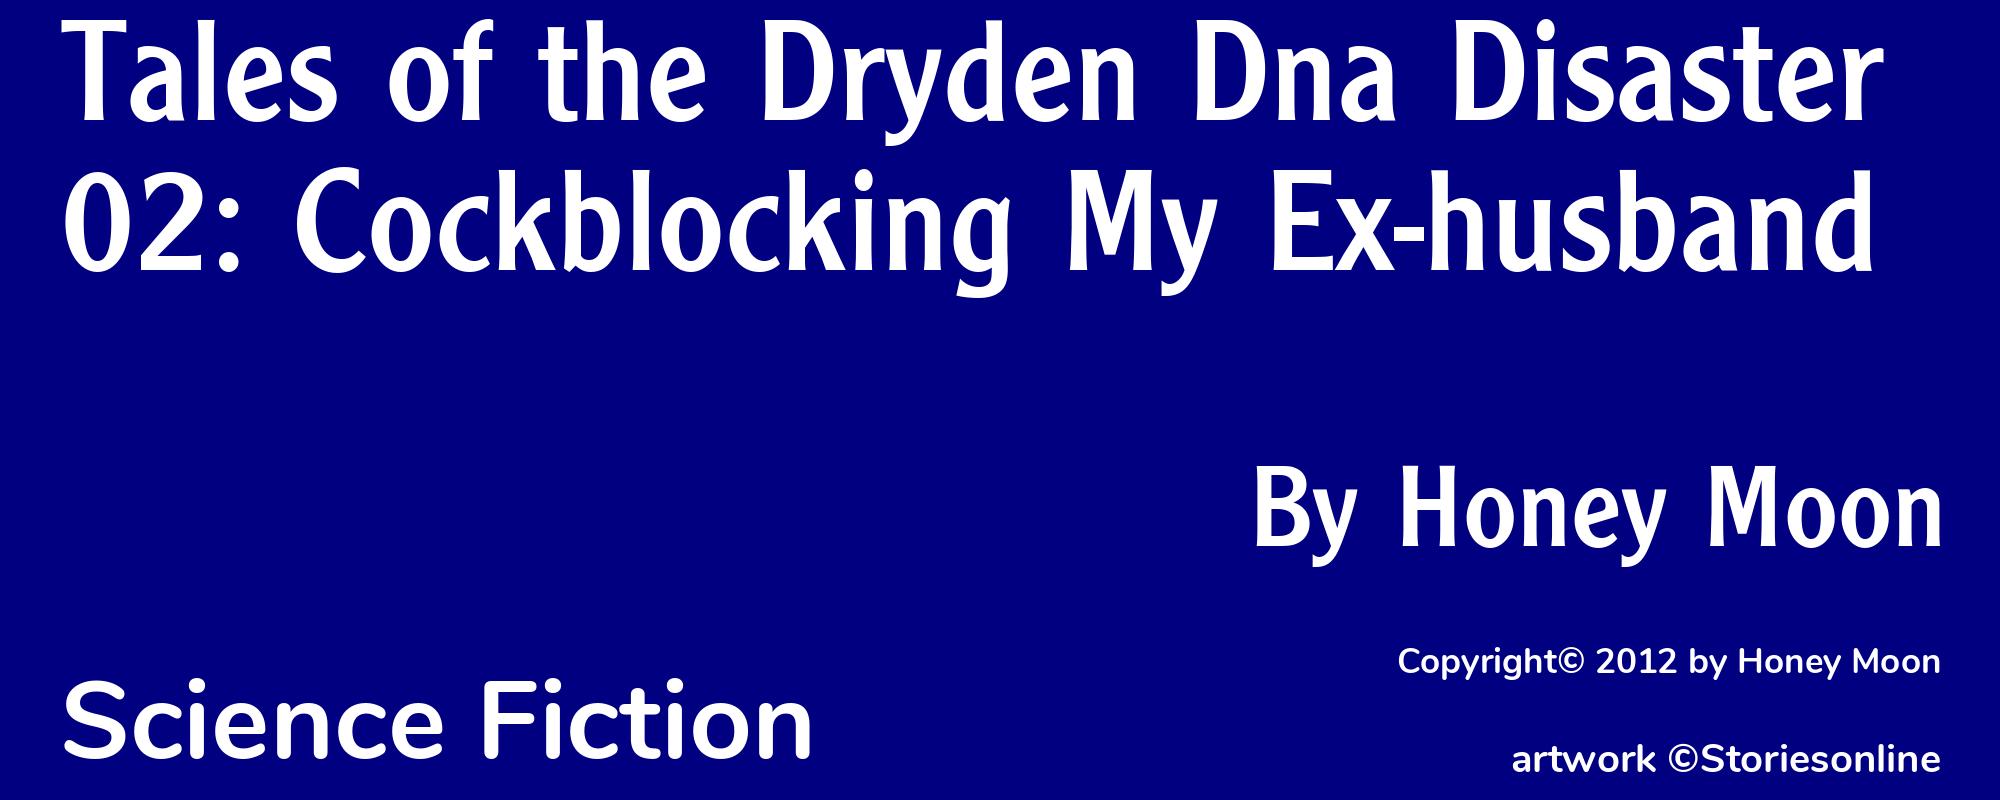 Tales of the Dryden Dna Disaster 02: Cockblocking My Ex-husband - Cover